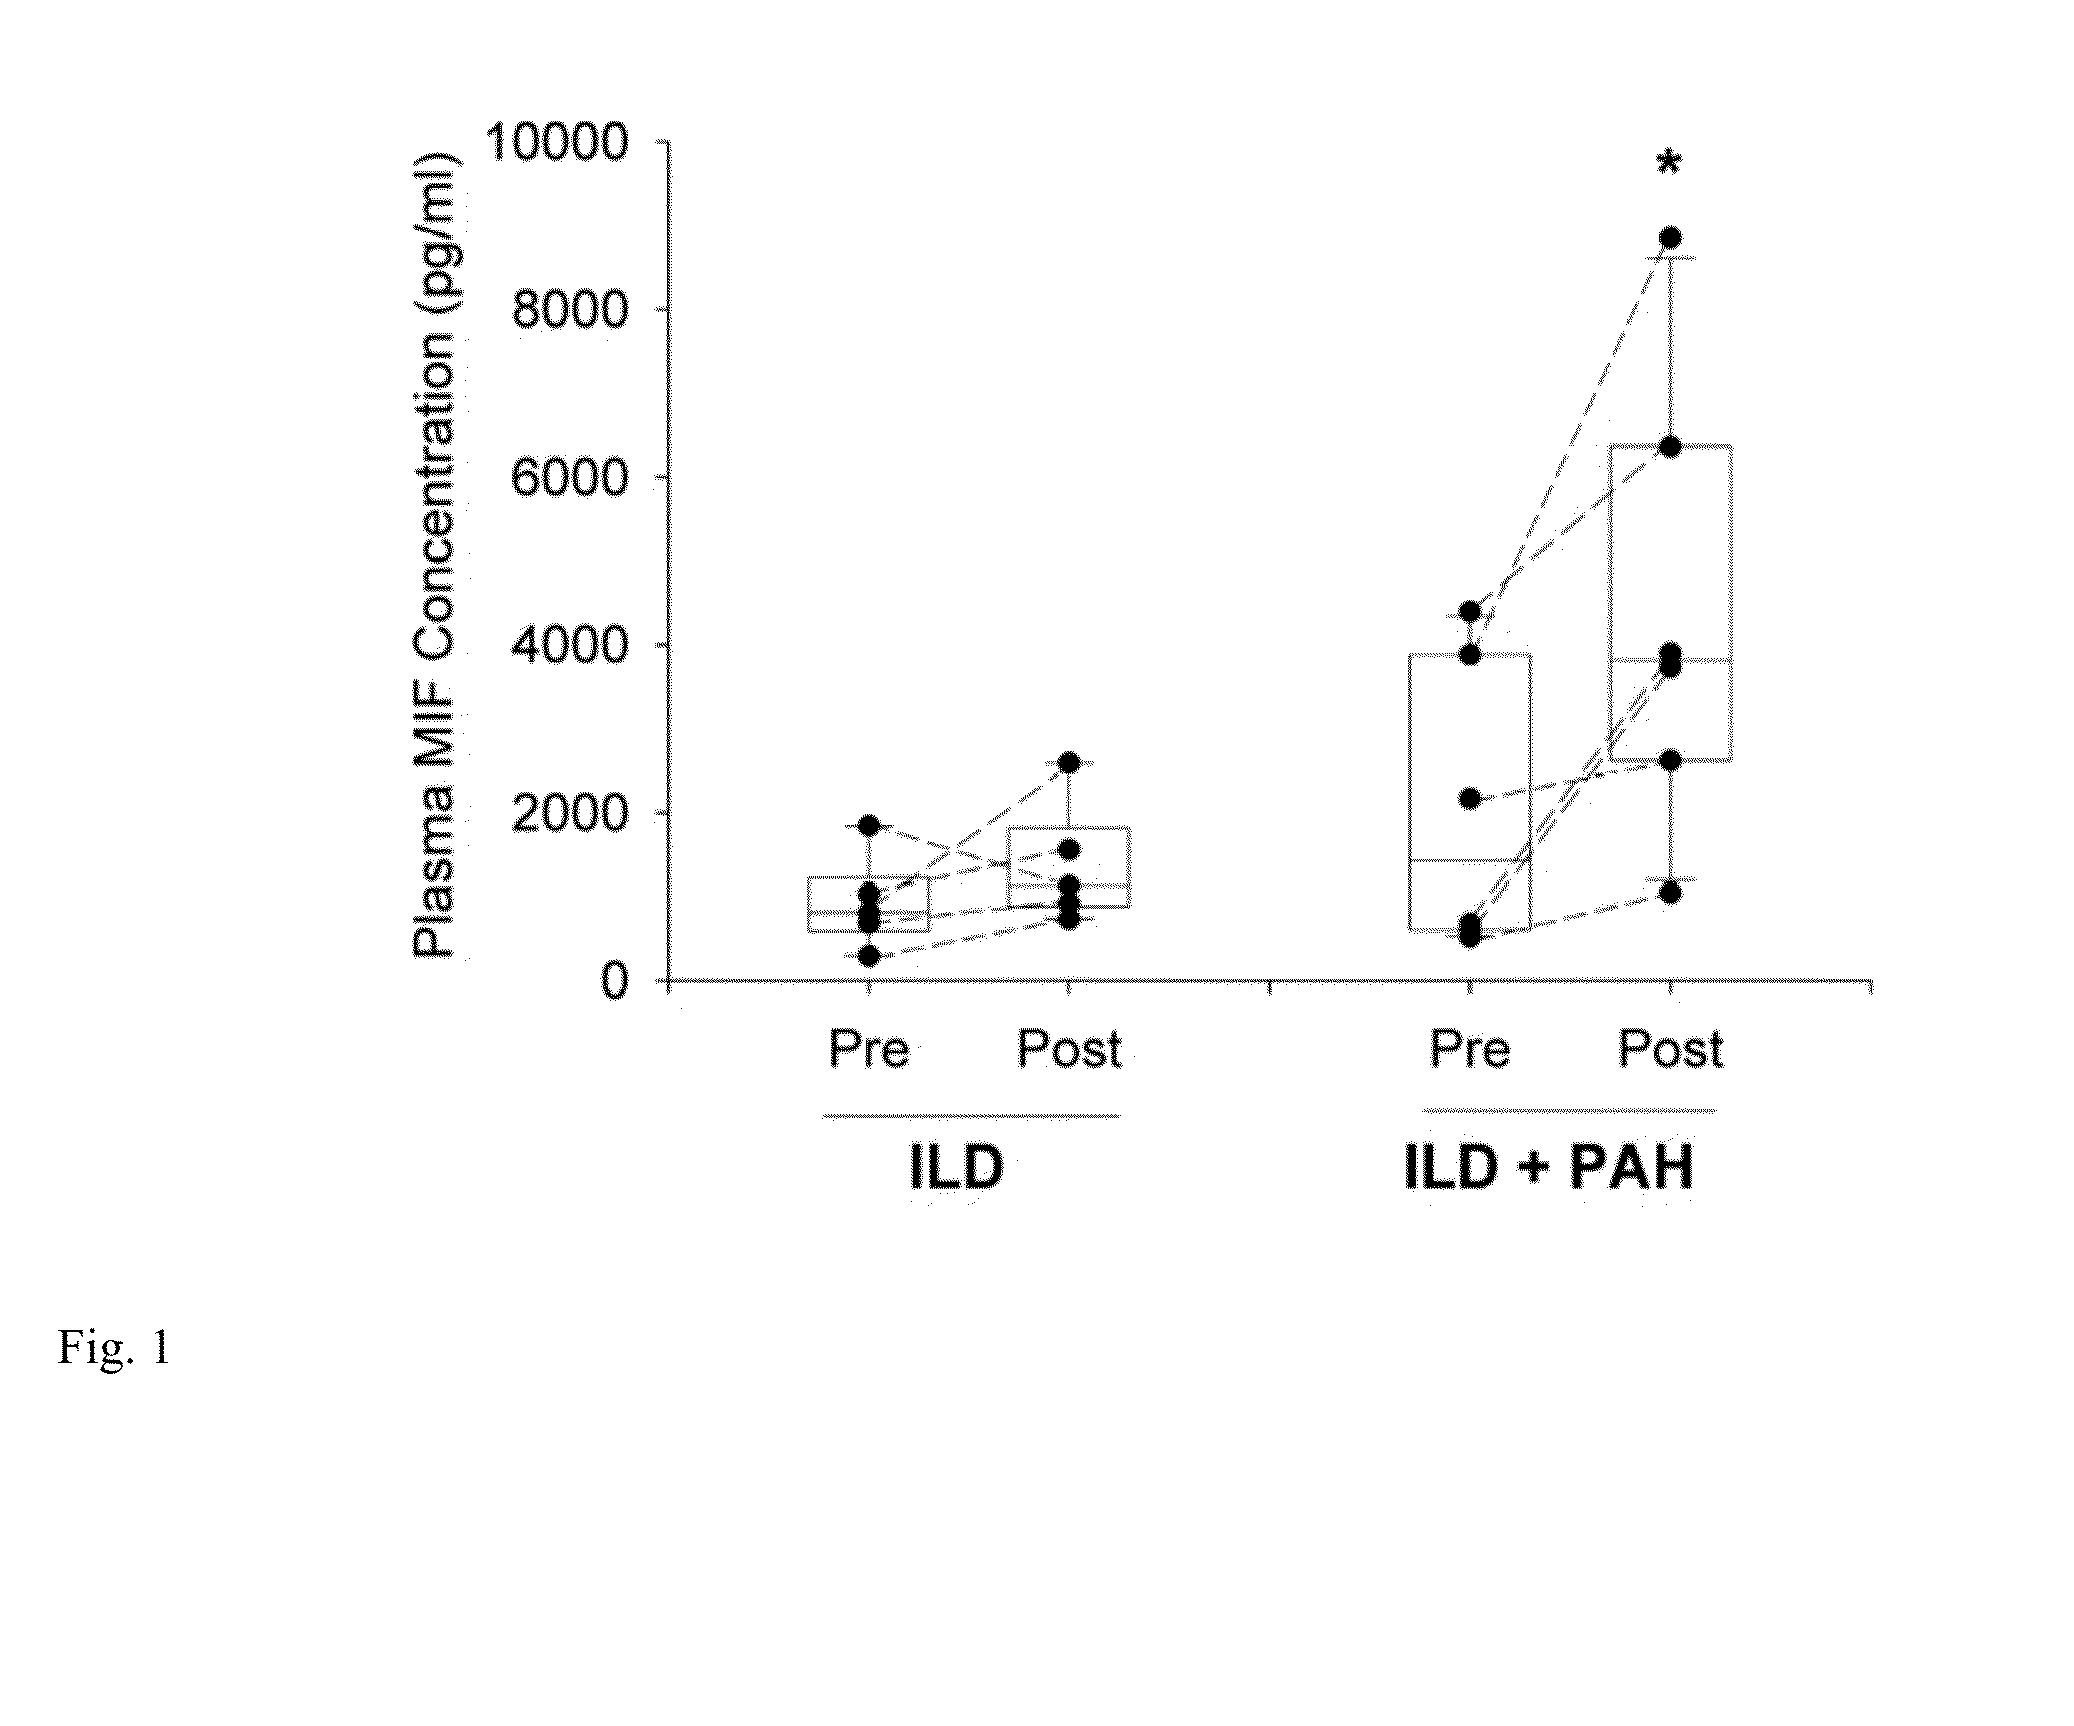 Method for treating pathologies associated with hypoxia using mif inhibitors